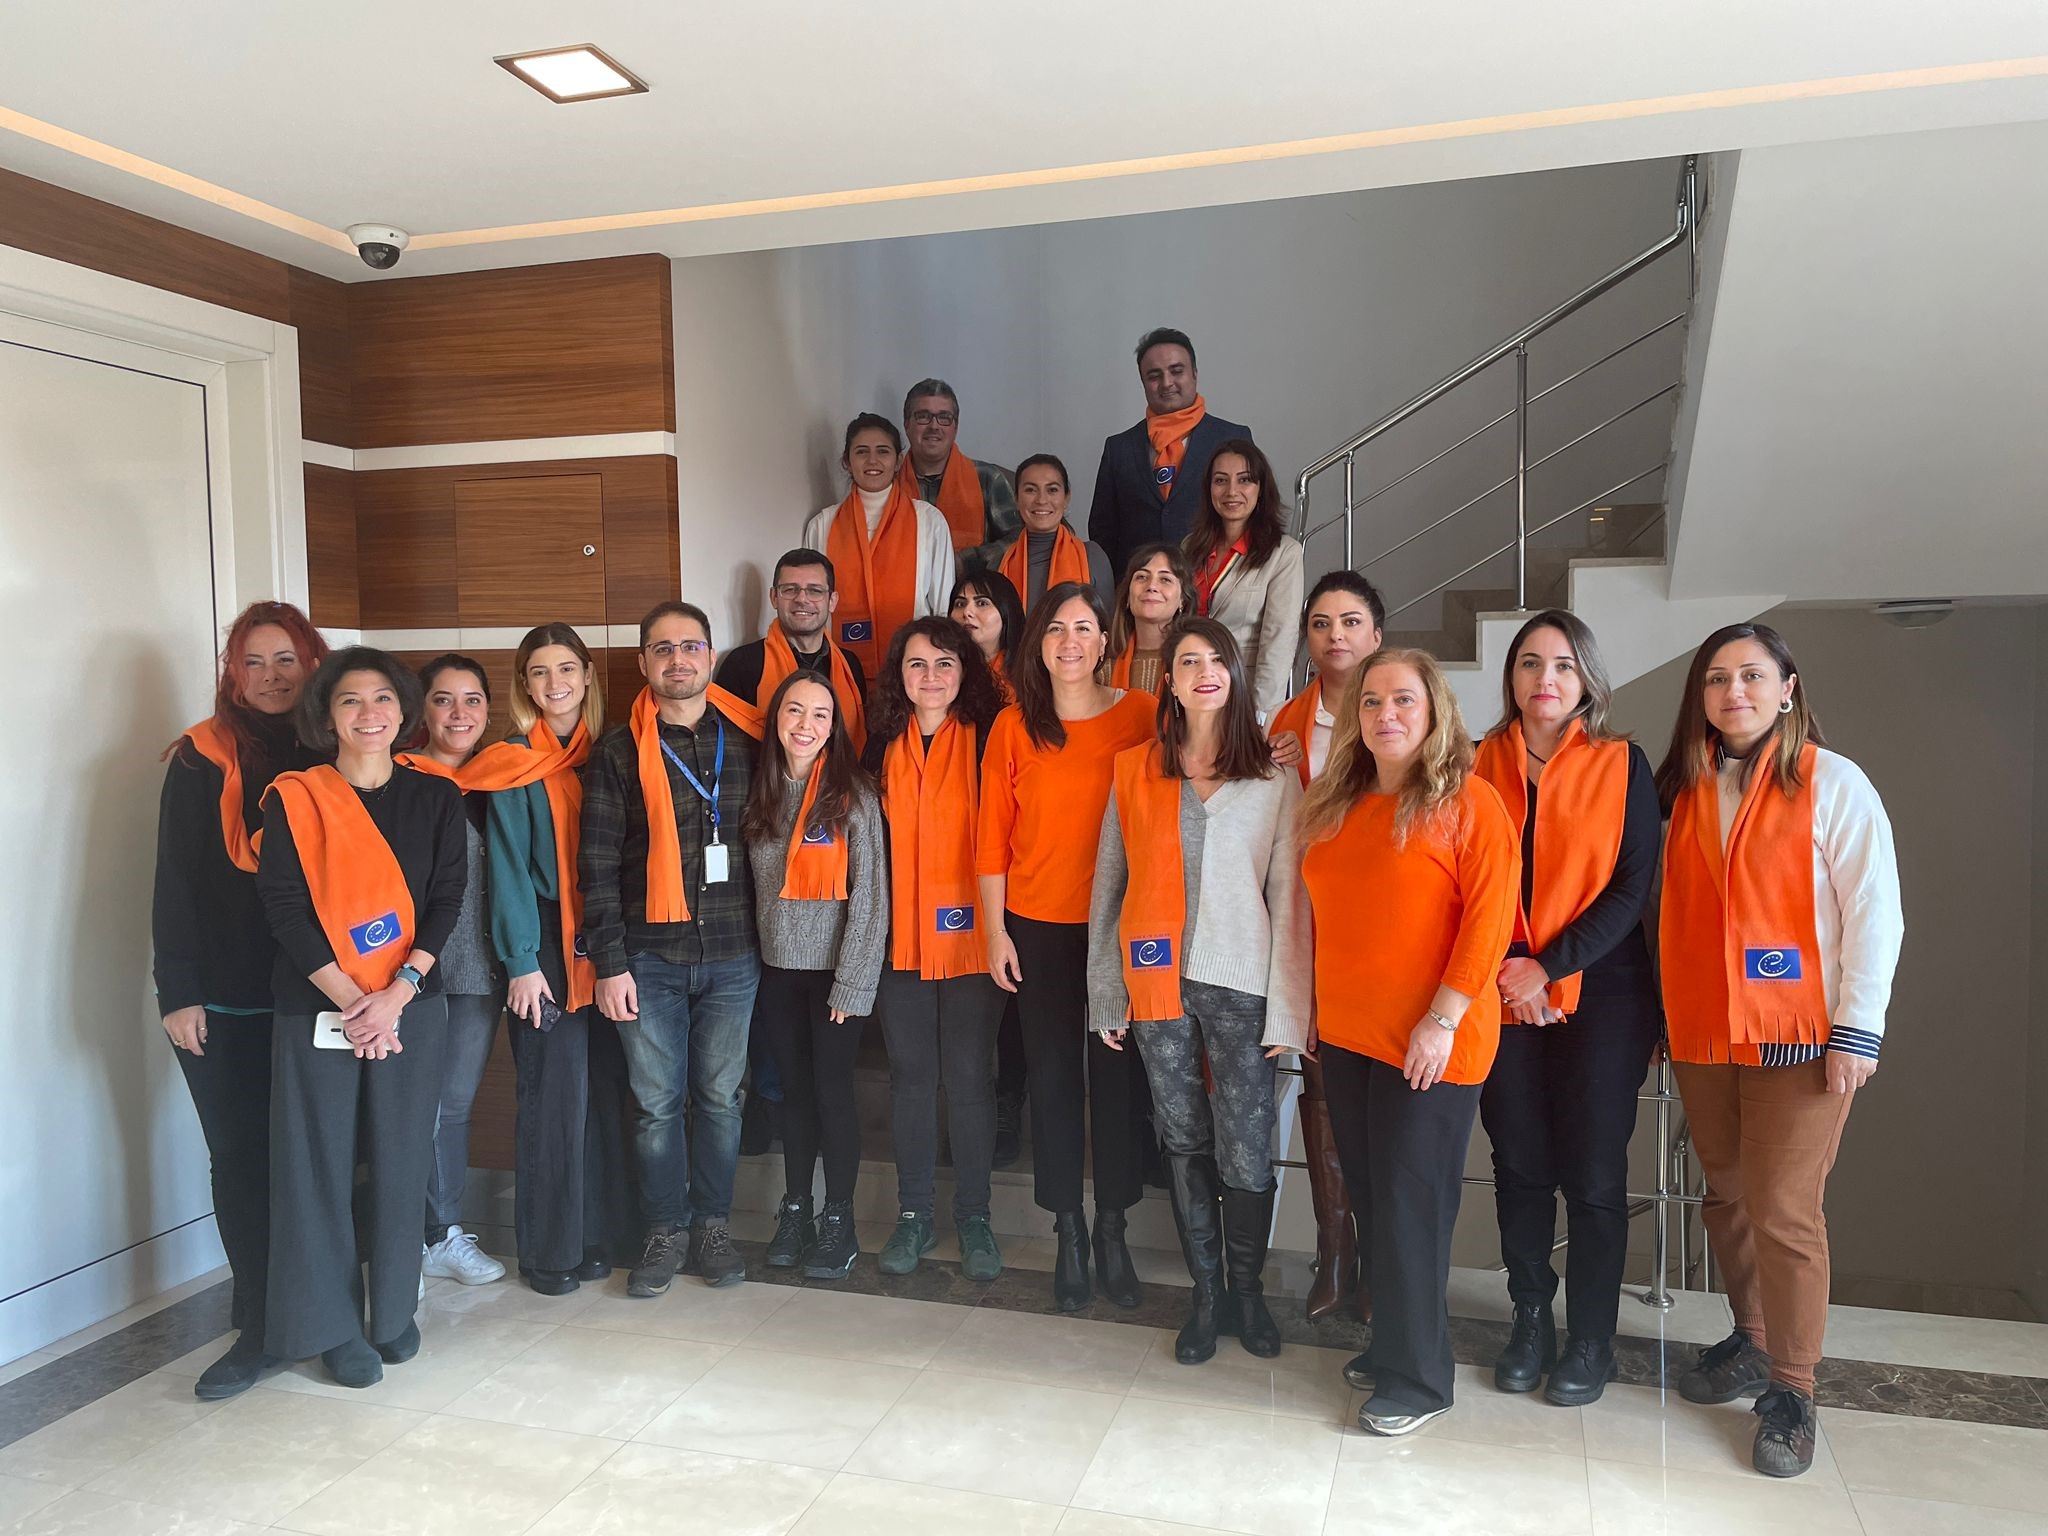 Council of Europe Programme Office in Ankara supports 16 days of activism to stop violence against women